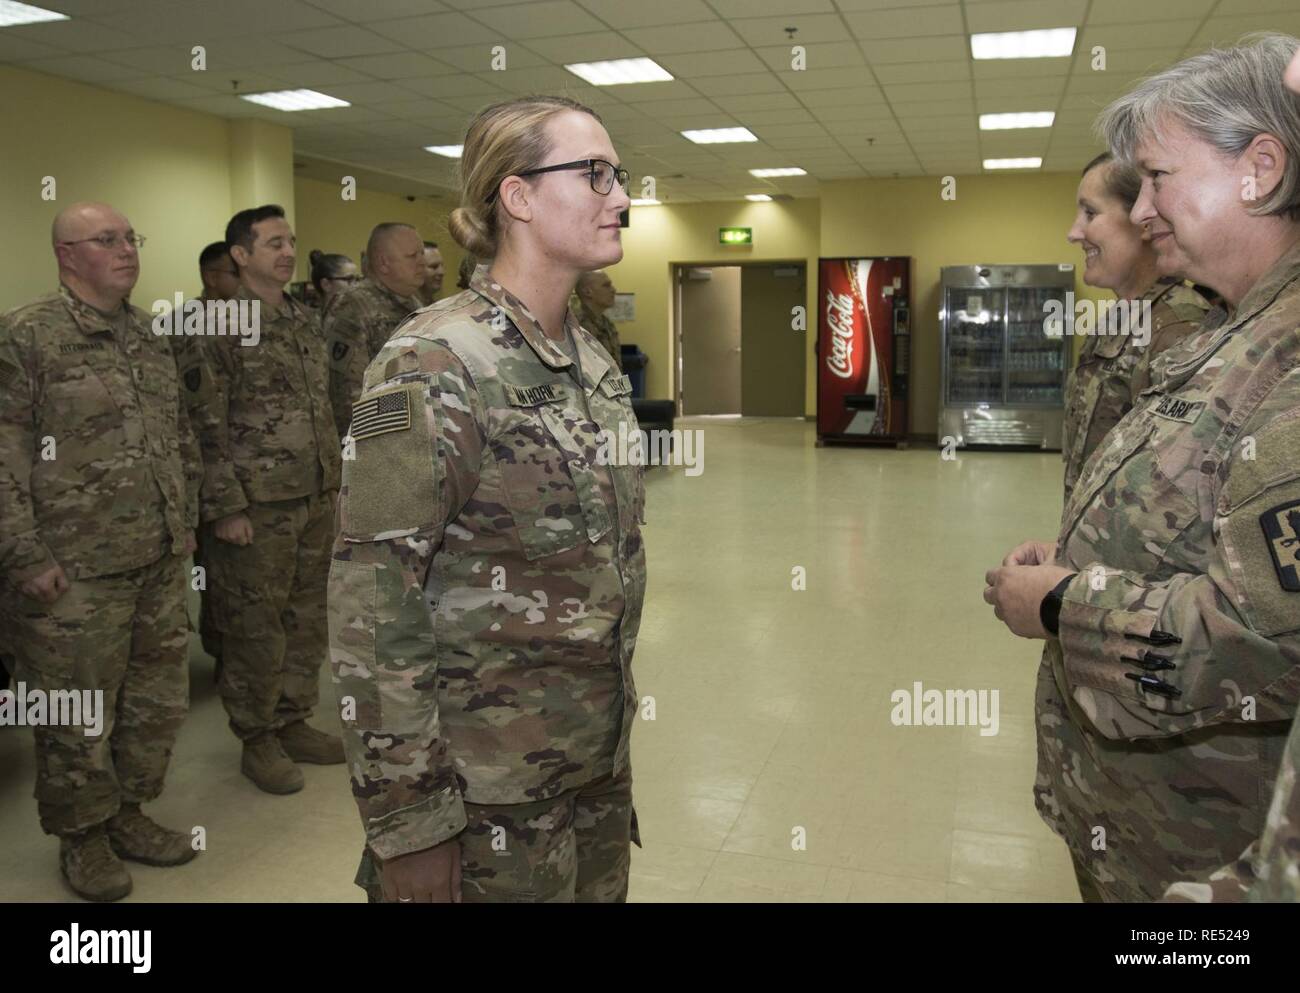 U.S. Army Pfc. Jenna Van Horn, a pharmacy specialist, is called to the front of the formation by her mother, U.S. Army Maj. Lisa Van Horn, the chief of patient administration, both assigned to the 452nd Combat Support Hospital during Jenna Van Horn's promotion ceremony in Camp Arifjan, Kuwait, Jan. 2, 2019. The Van Horns shared the unique experience of deploying together as a mother and daughter team to help support the health readiness of service members throughout Central Command's area of responsibility. Stock Photo